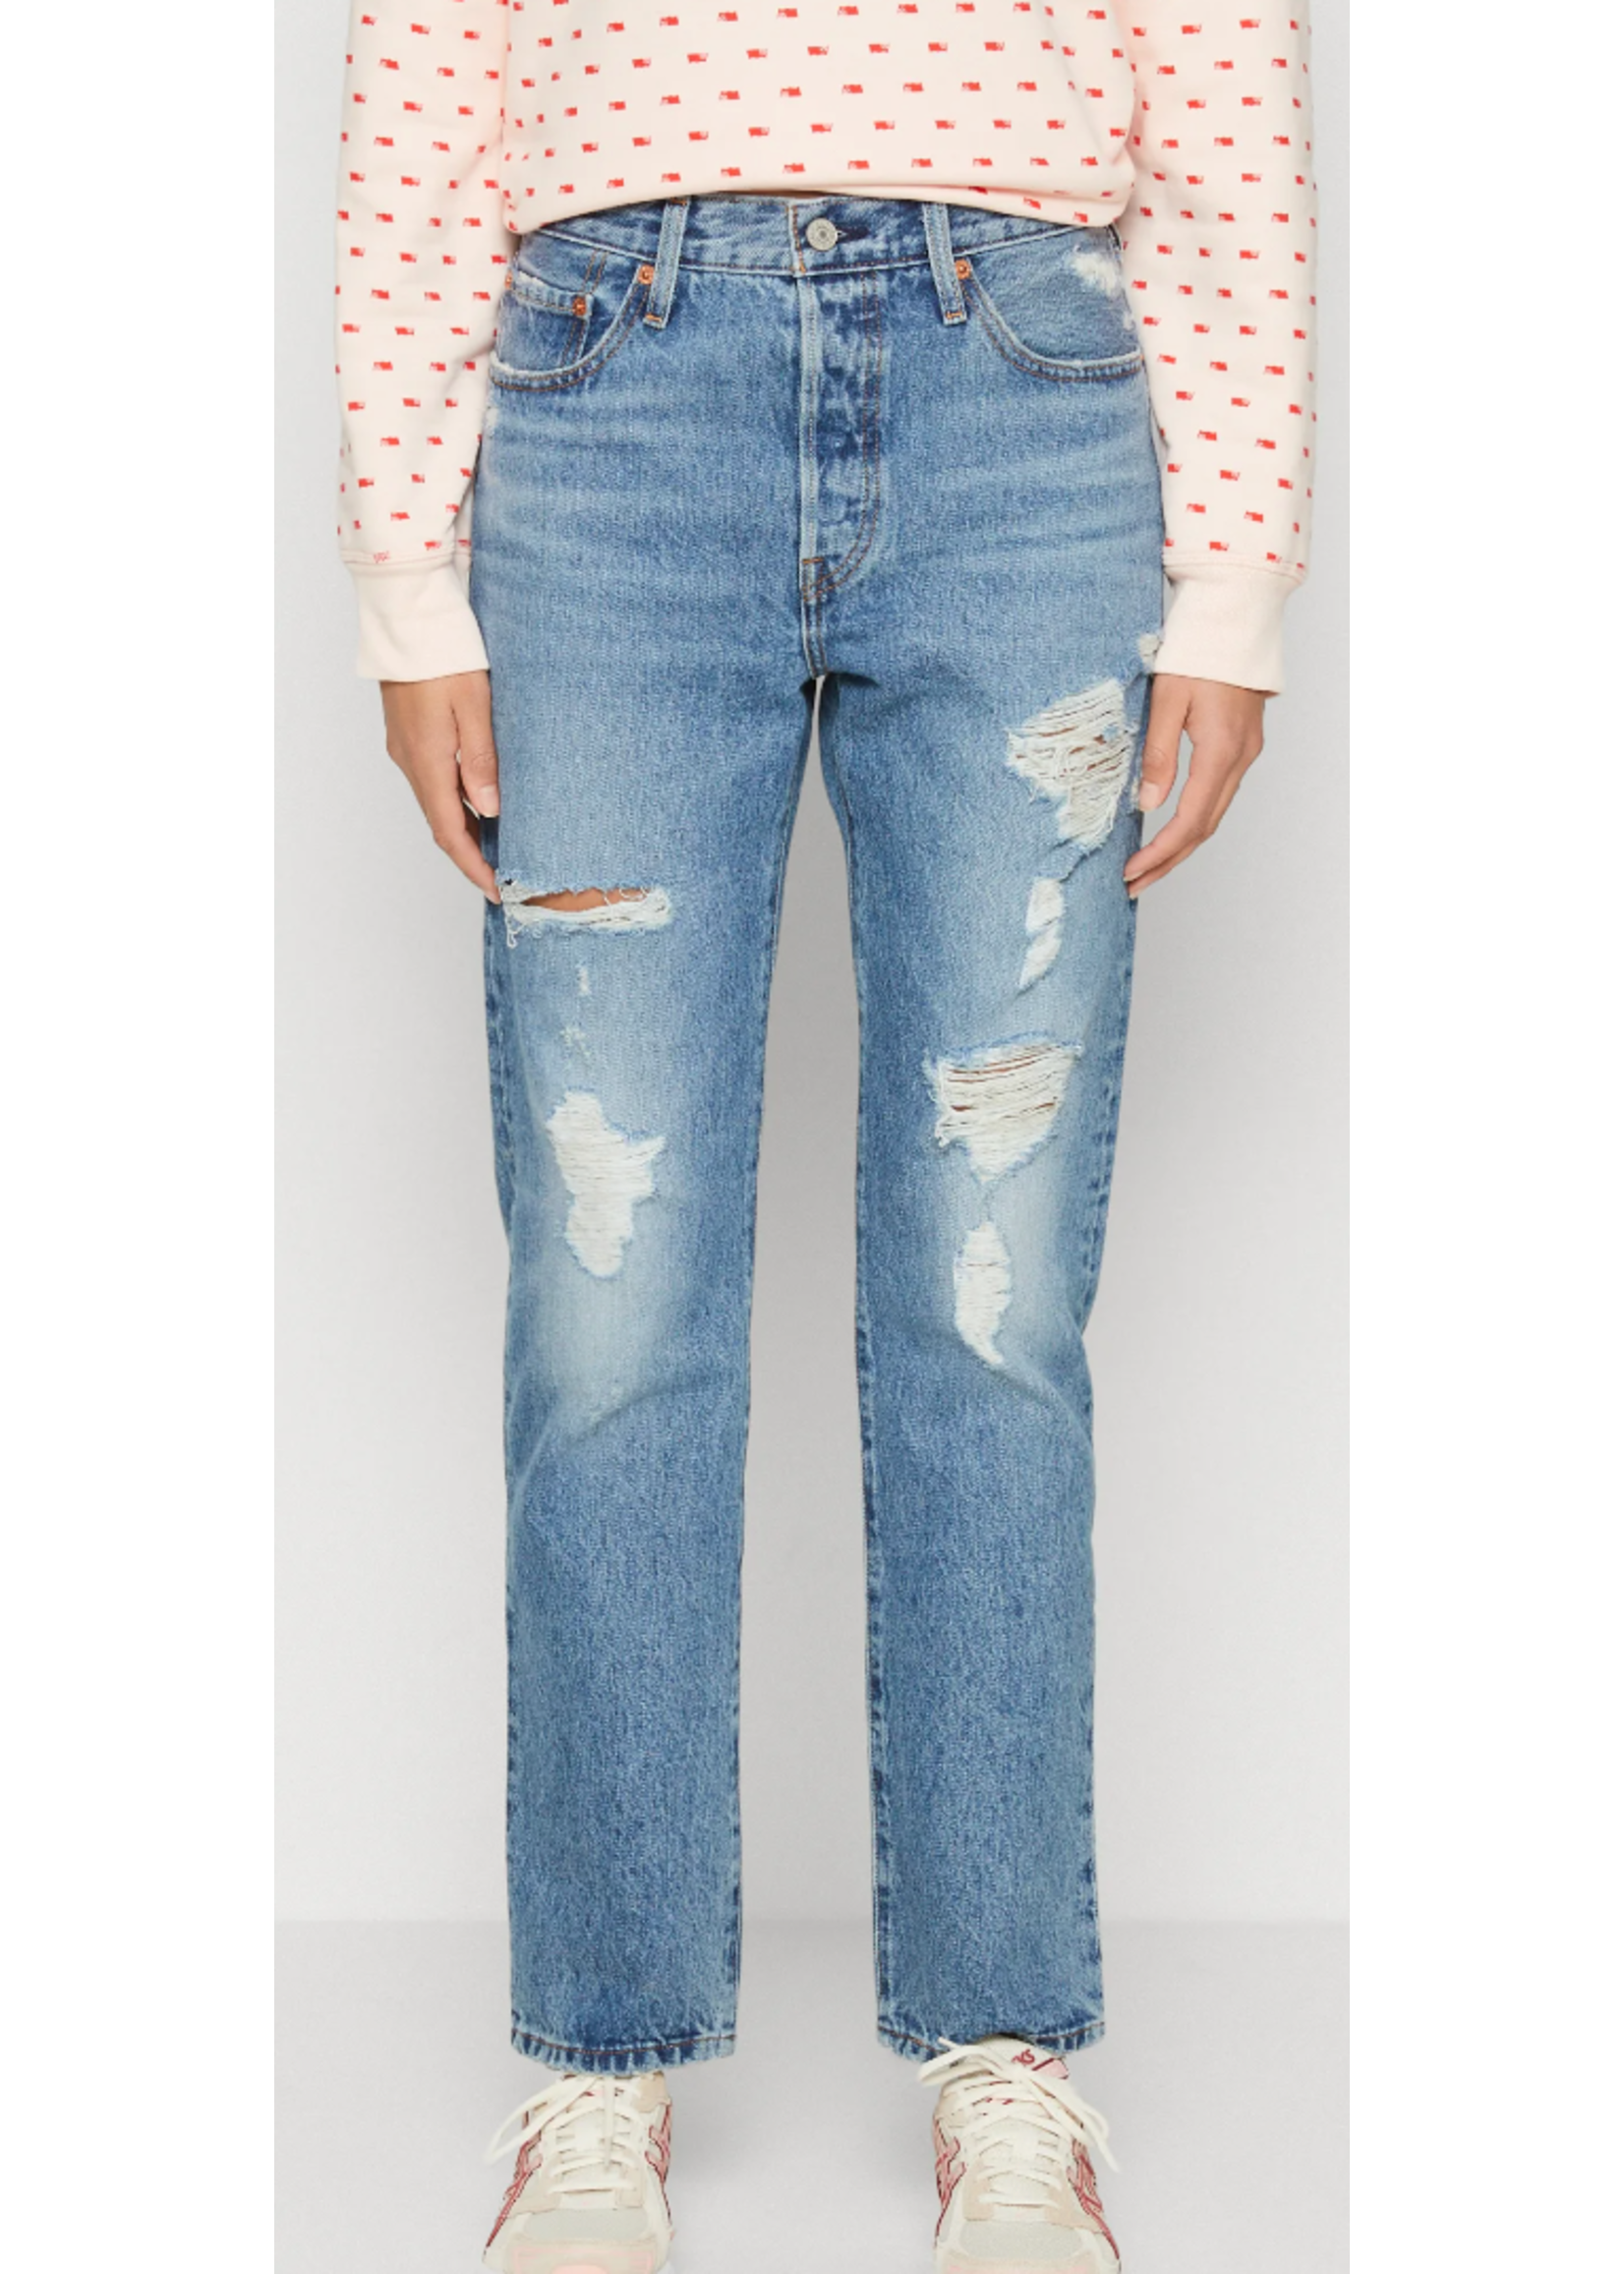 Levi Strauss Canada 501 JEAN FOR WOMEN HITS DIFFERENT